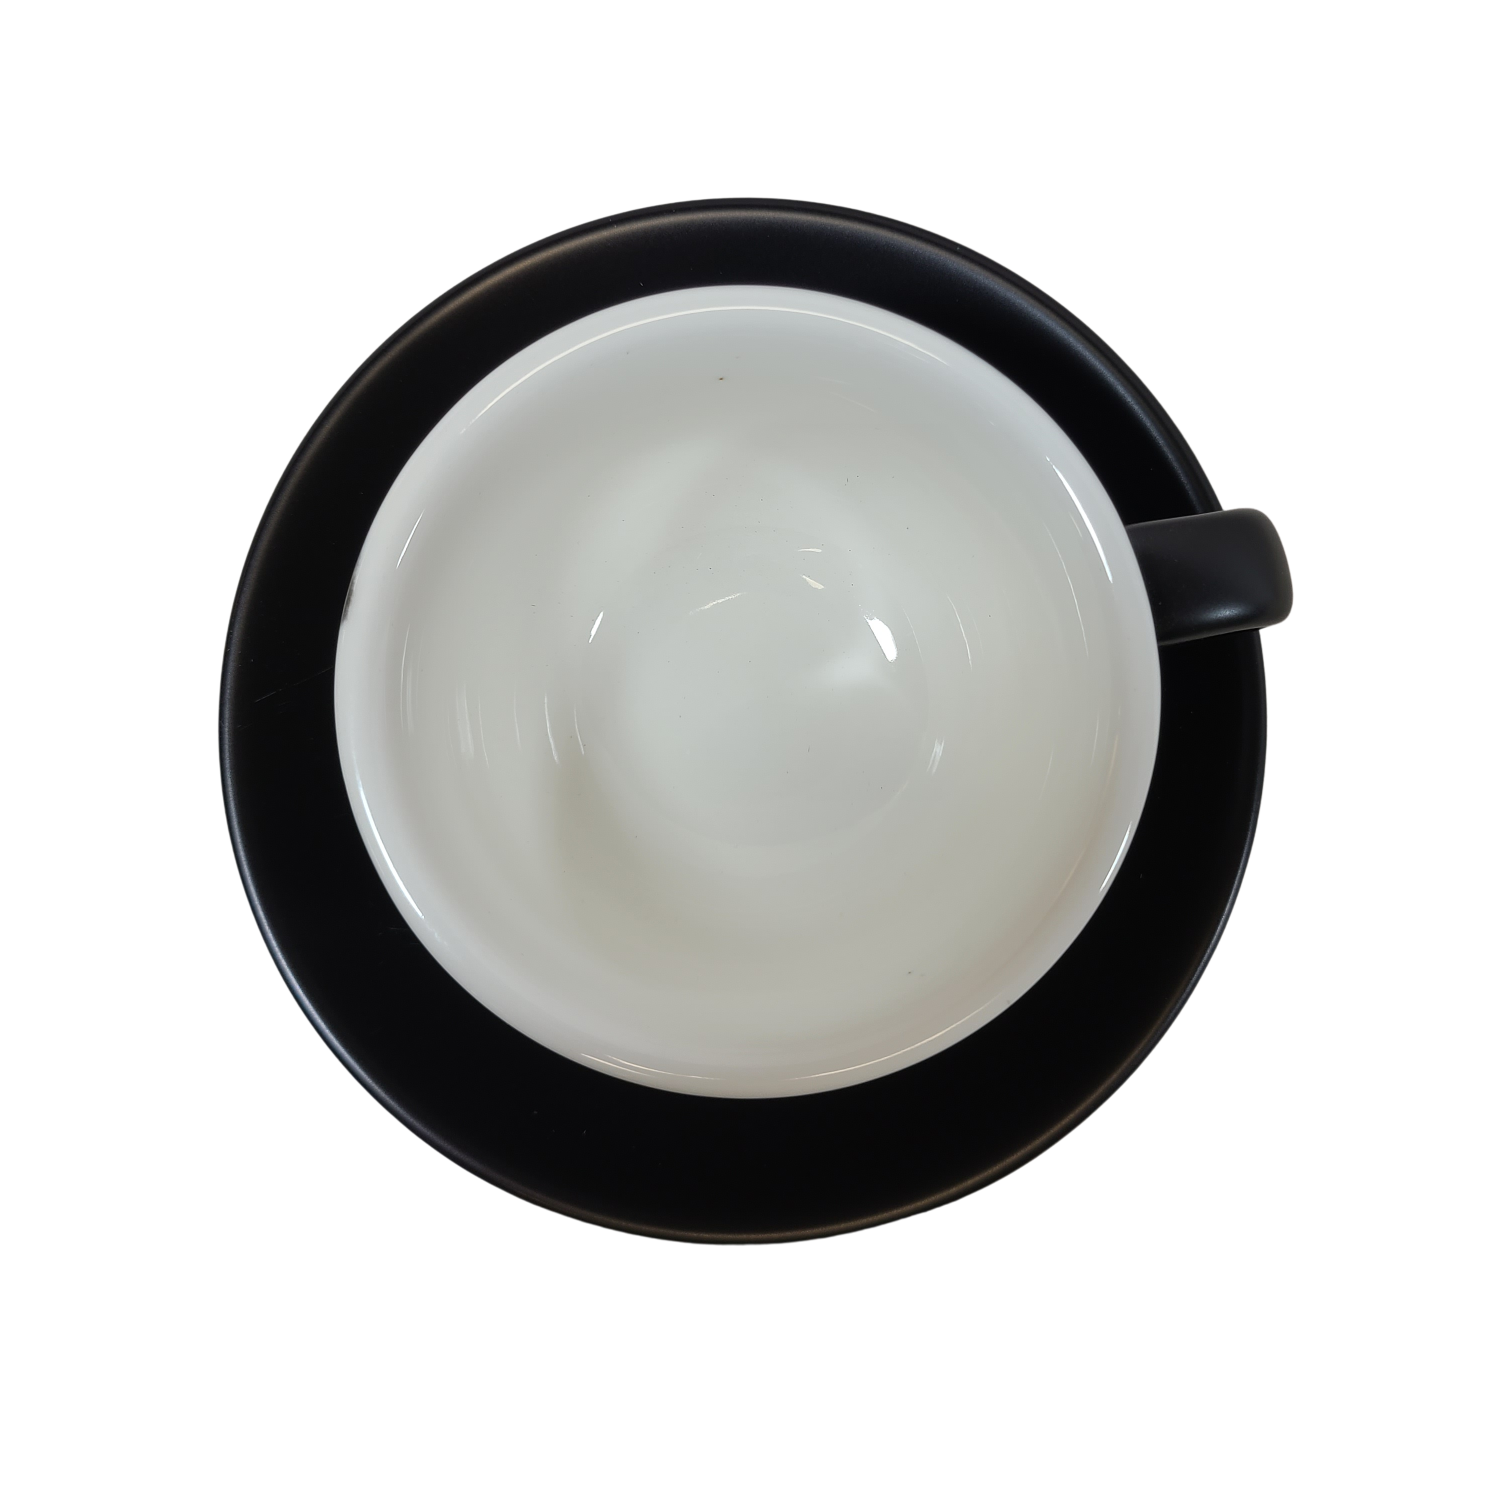 Coffee Addicts commercial ceramic cup with saucer in matte black cappuccino cortado cup 5oz 150ml top view